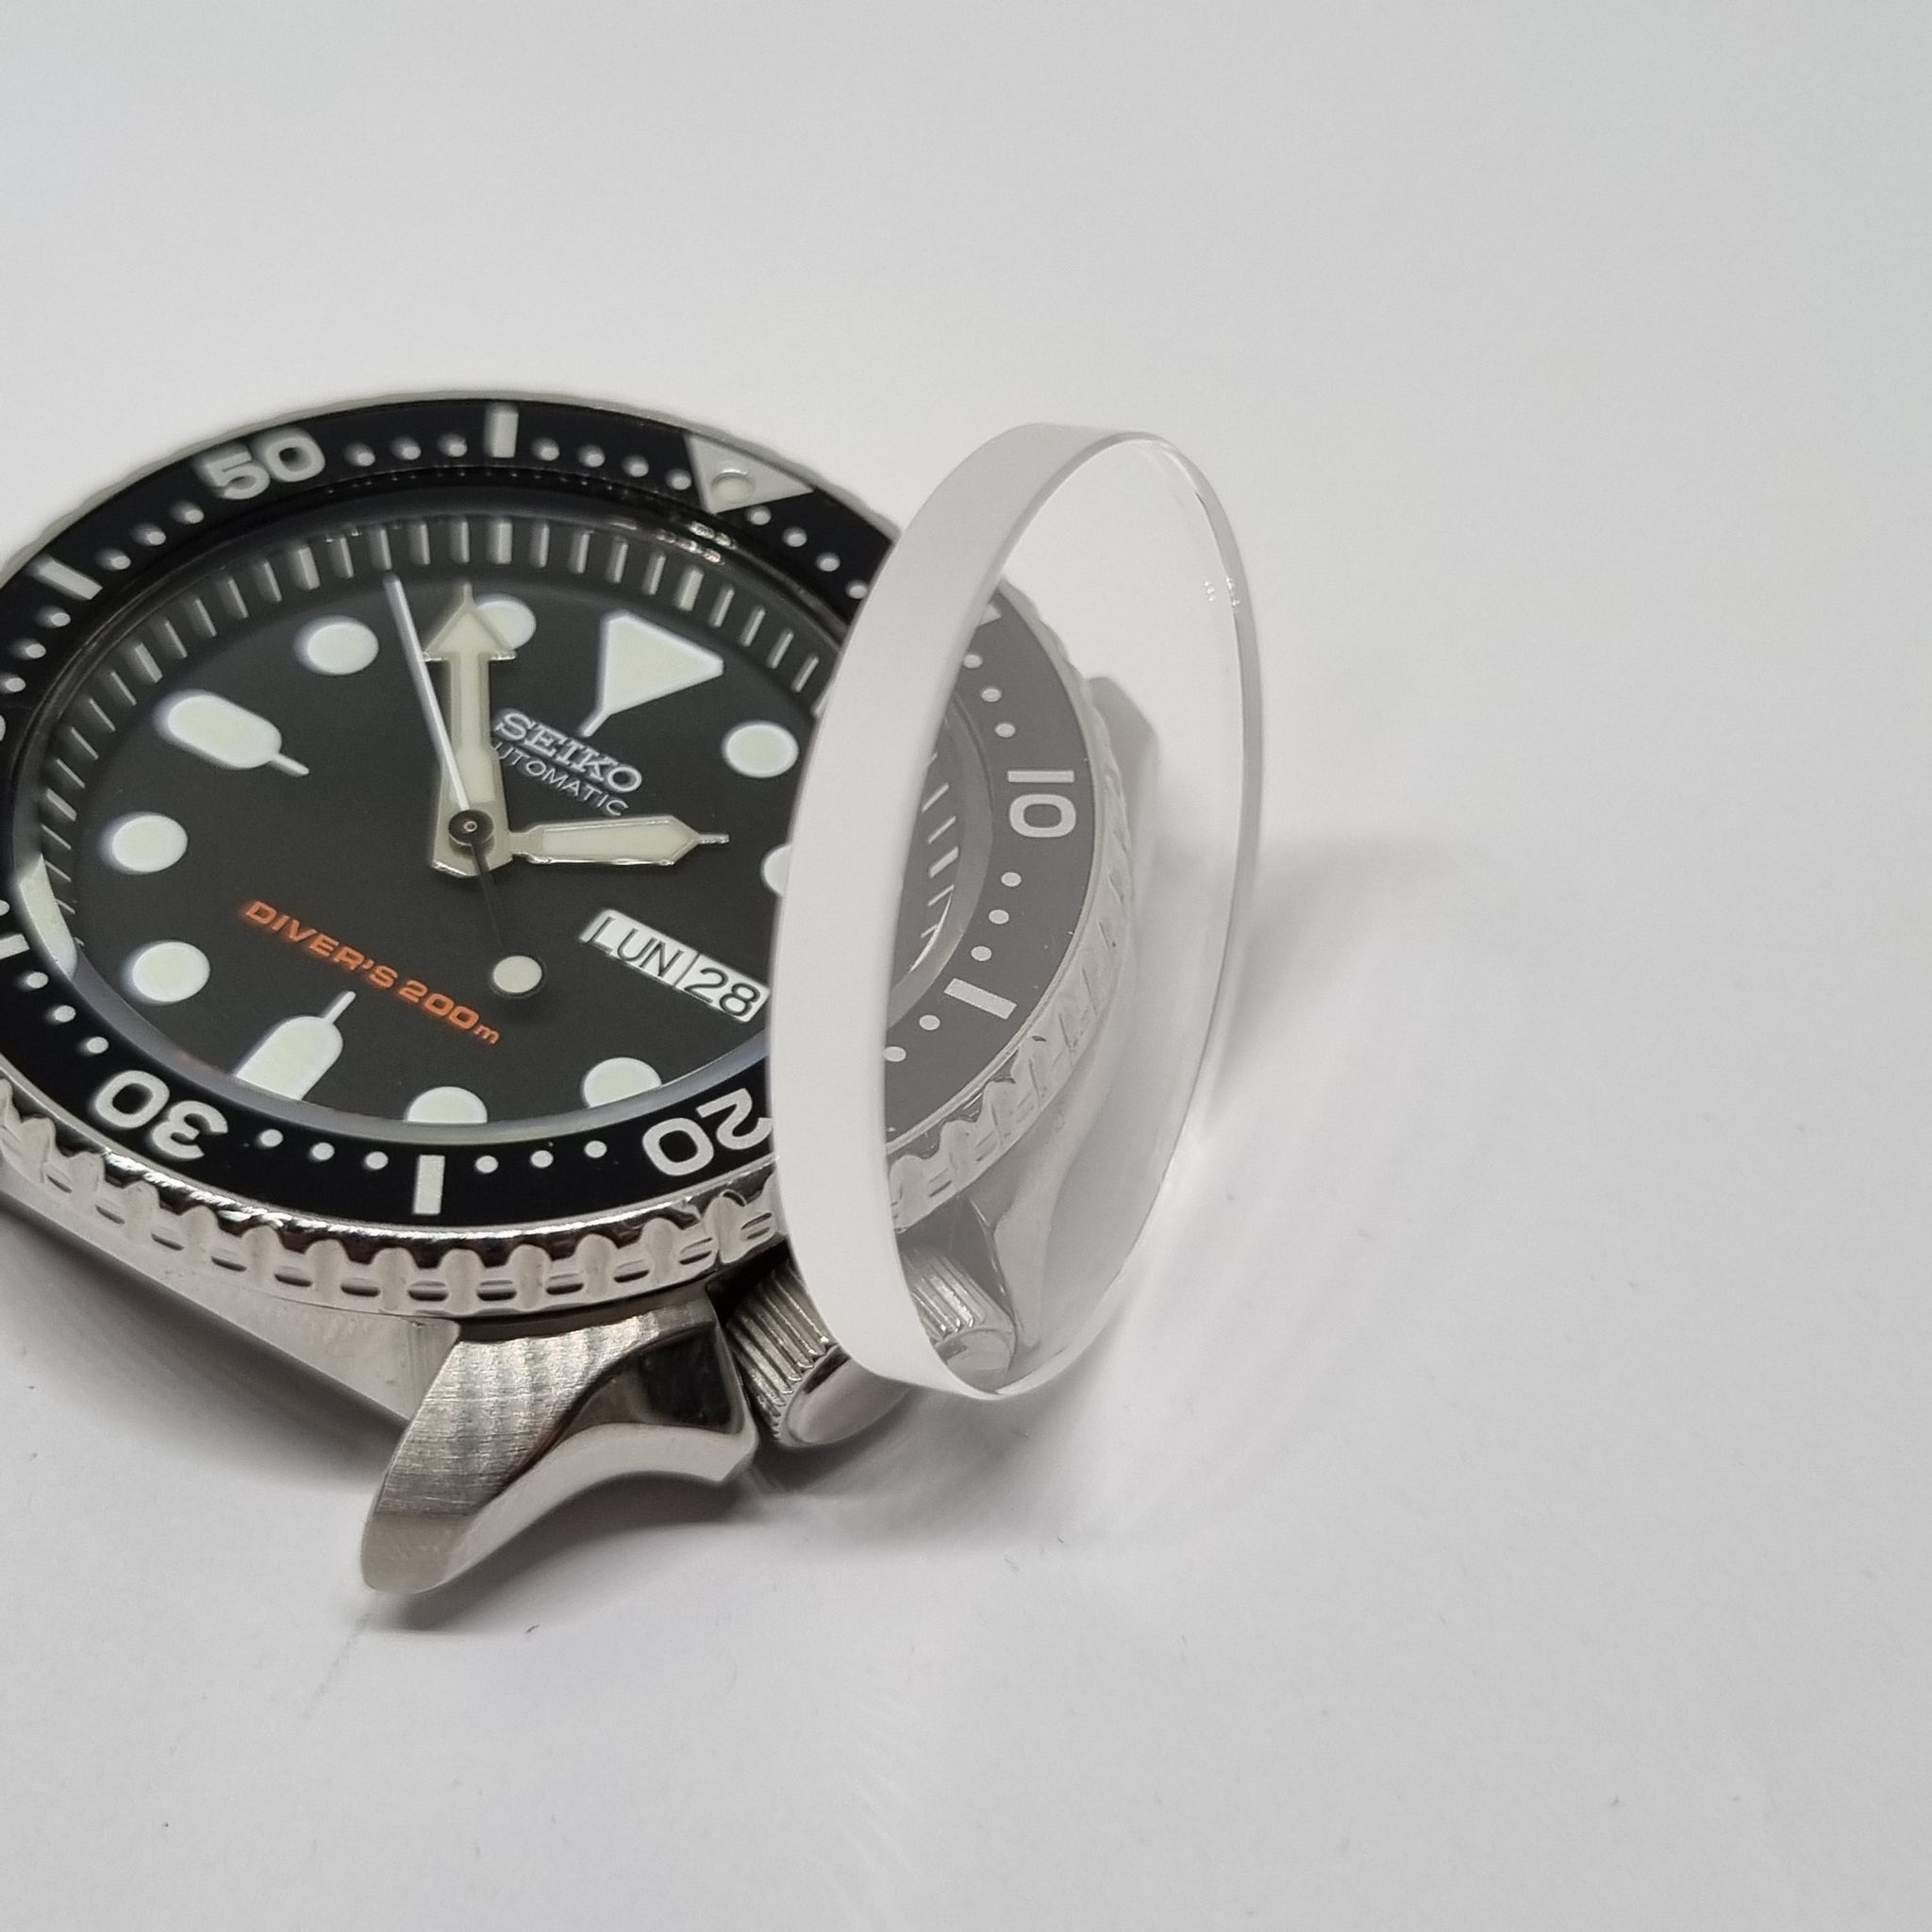 CRS003 Flat Sapphire Crystal for SKX007 / SRPD – Mod Mode Watches